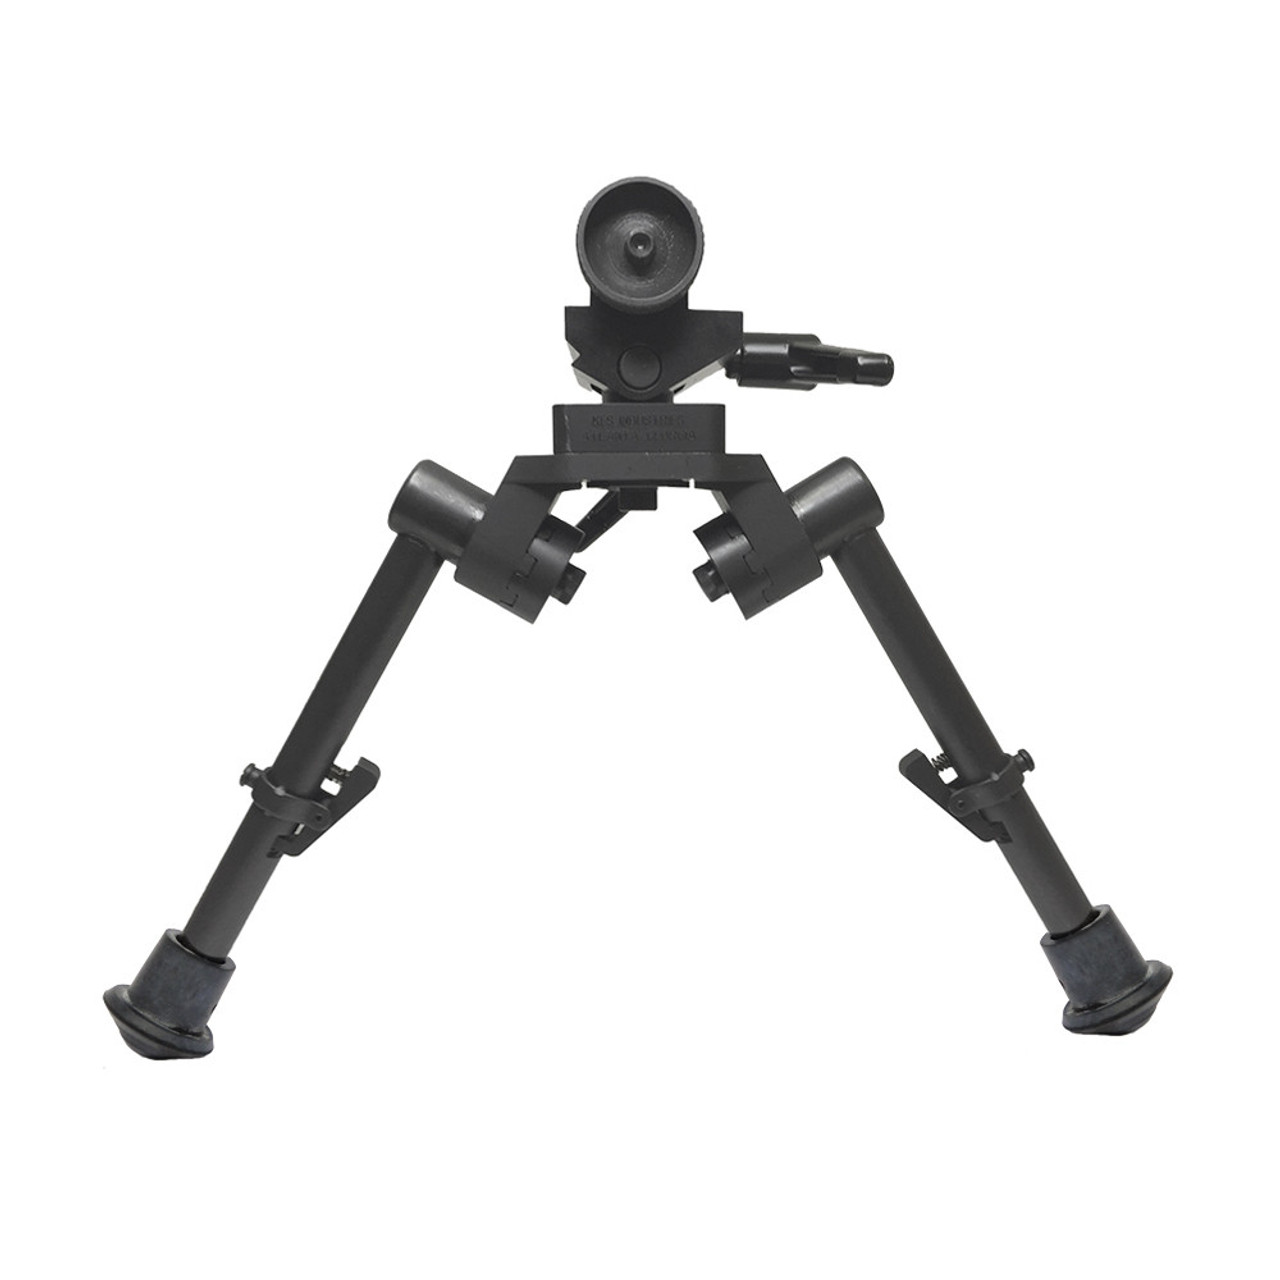 S7 Bipod 7-9" legs with Rubber Feet, fits Accuracy International (AT) Rifles and (AT-AICS) Chassis Systems